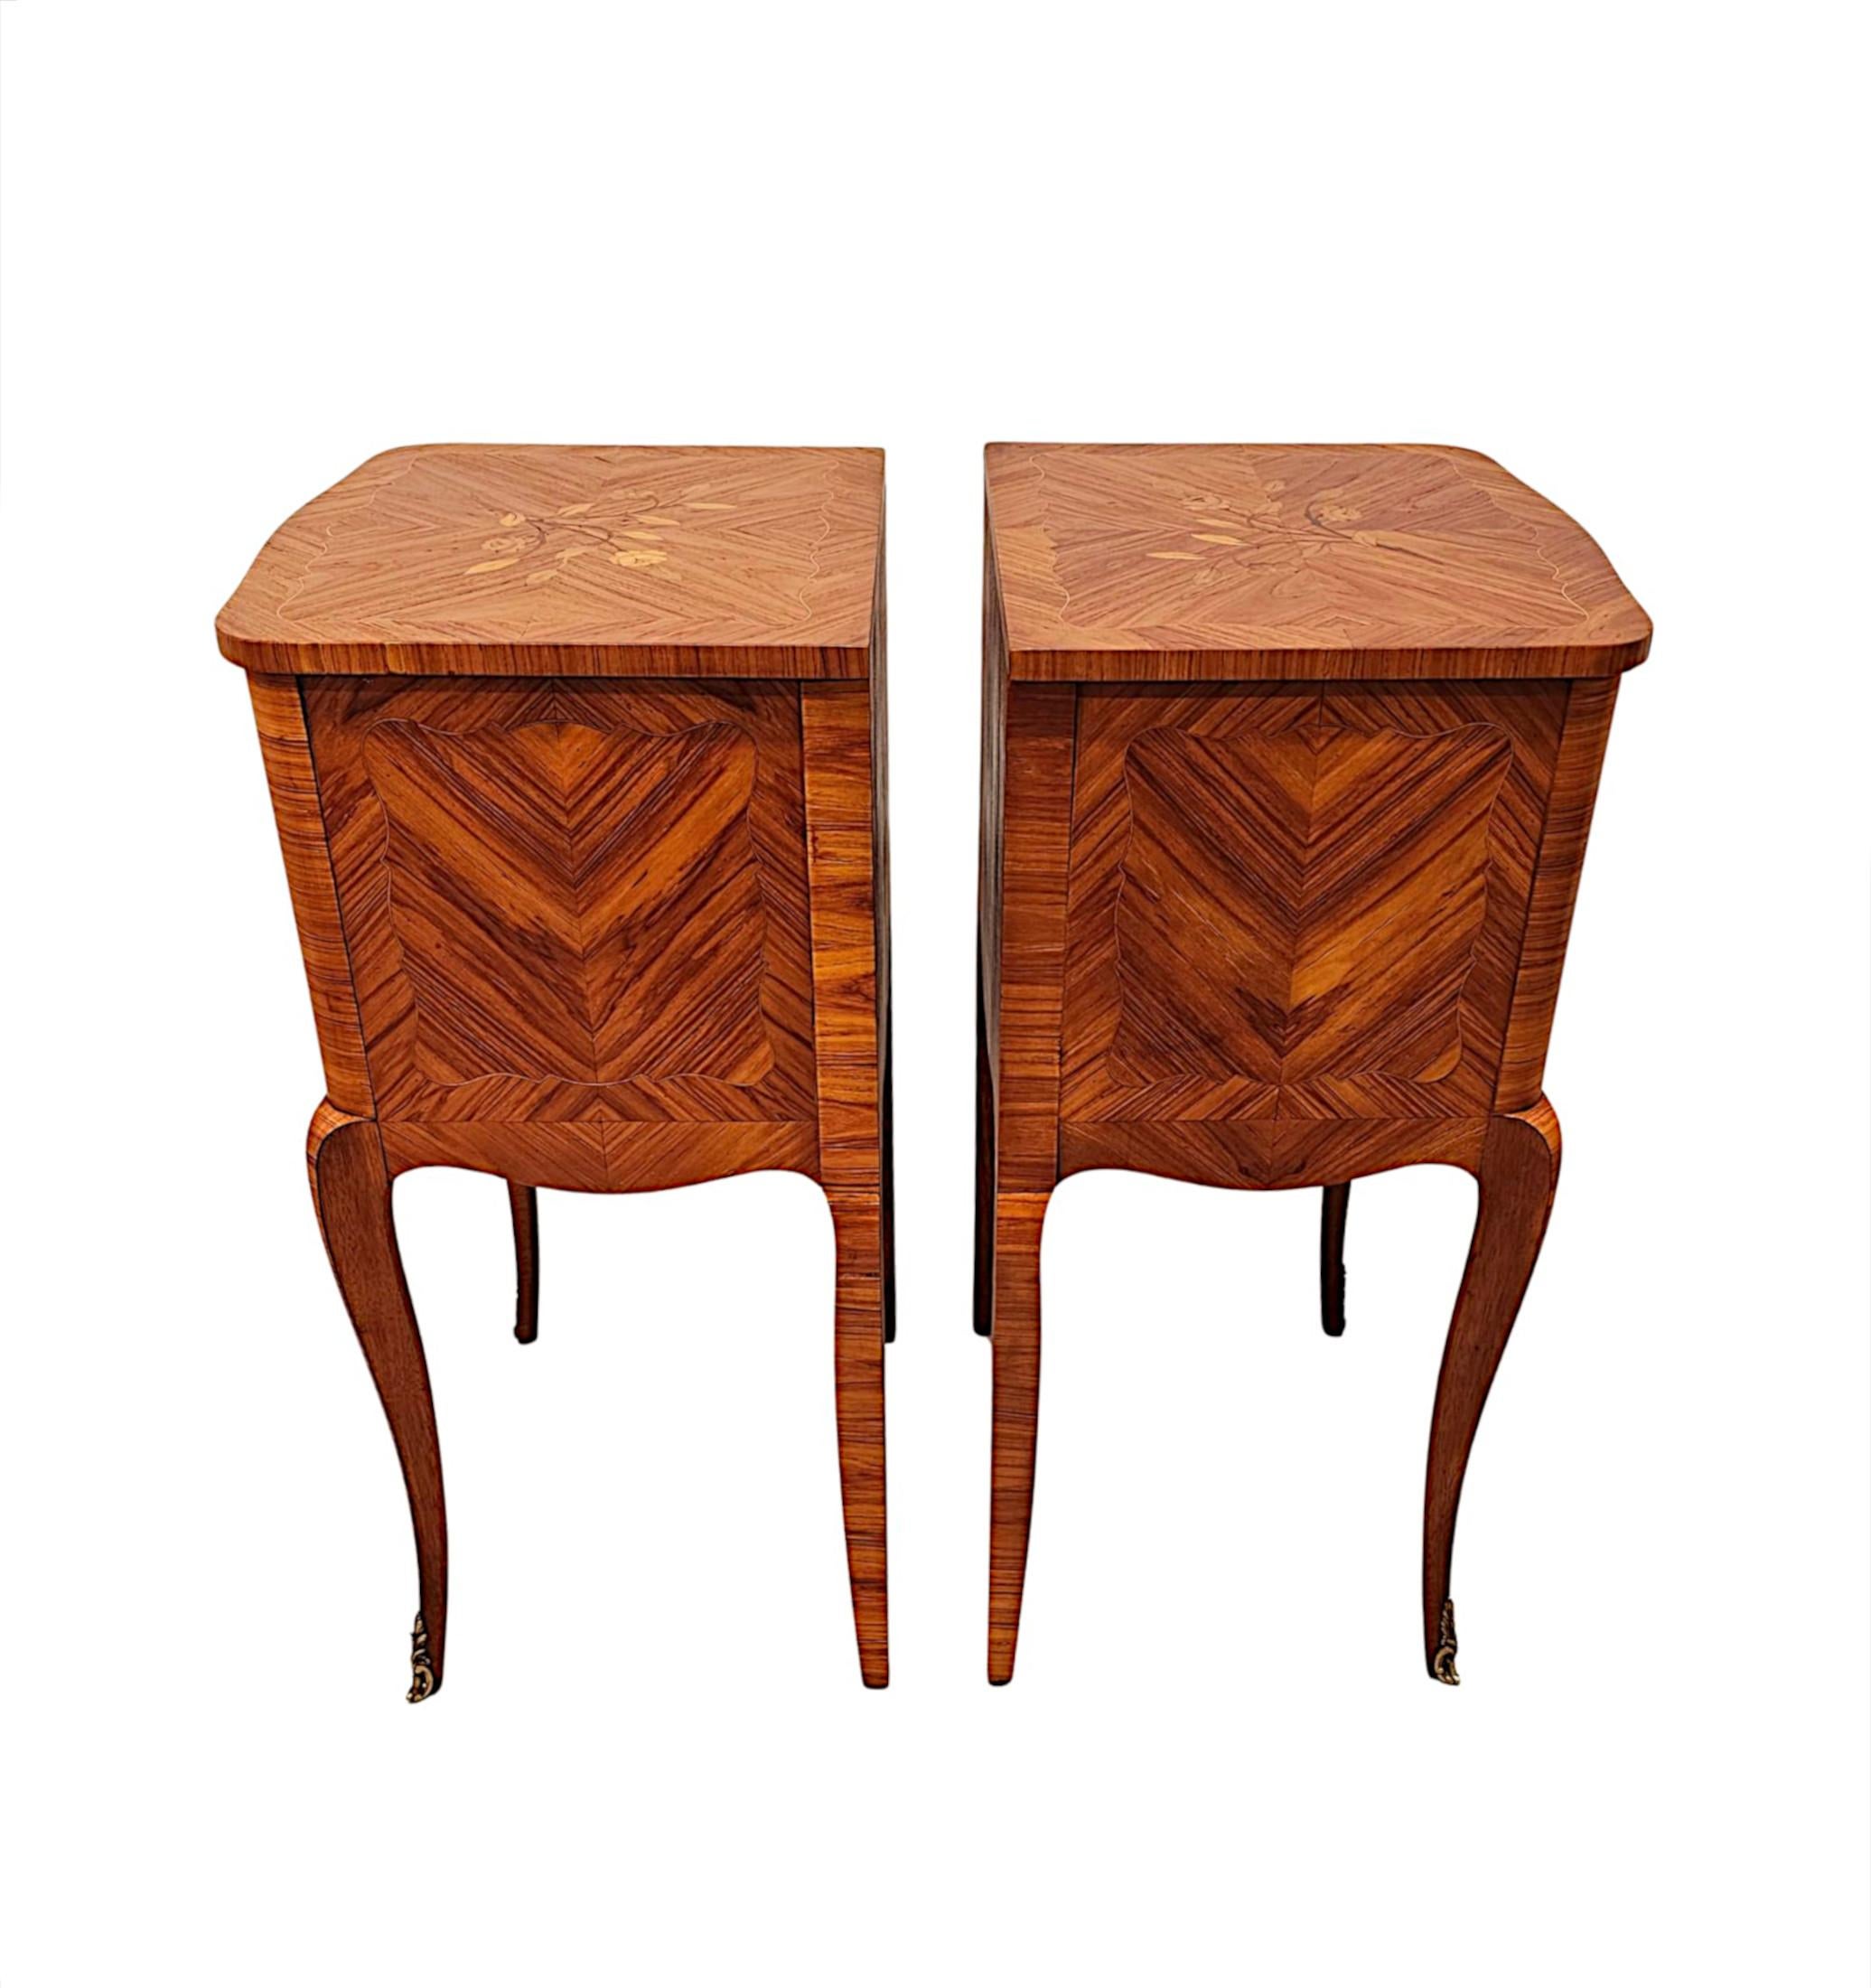 A Fabulous Pair of Early 20th Century Marquetry Inlaid Bedside Tables or Chests In Good Condition For Sale In Dublin, IE